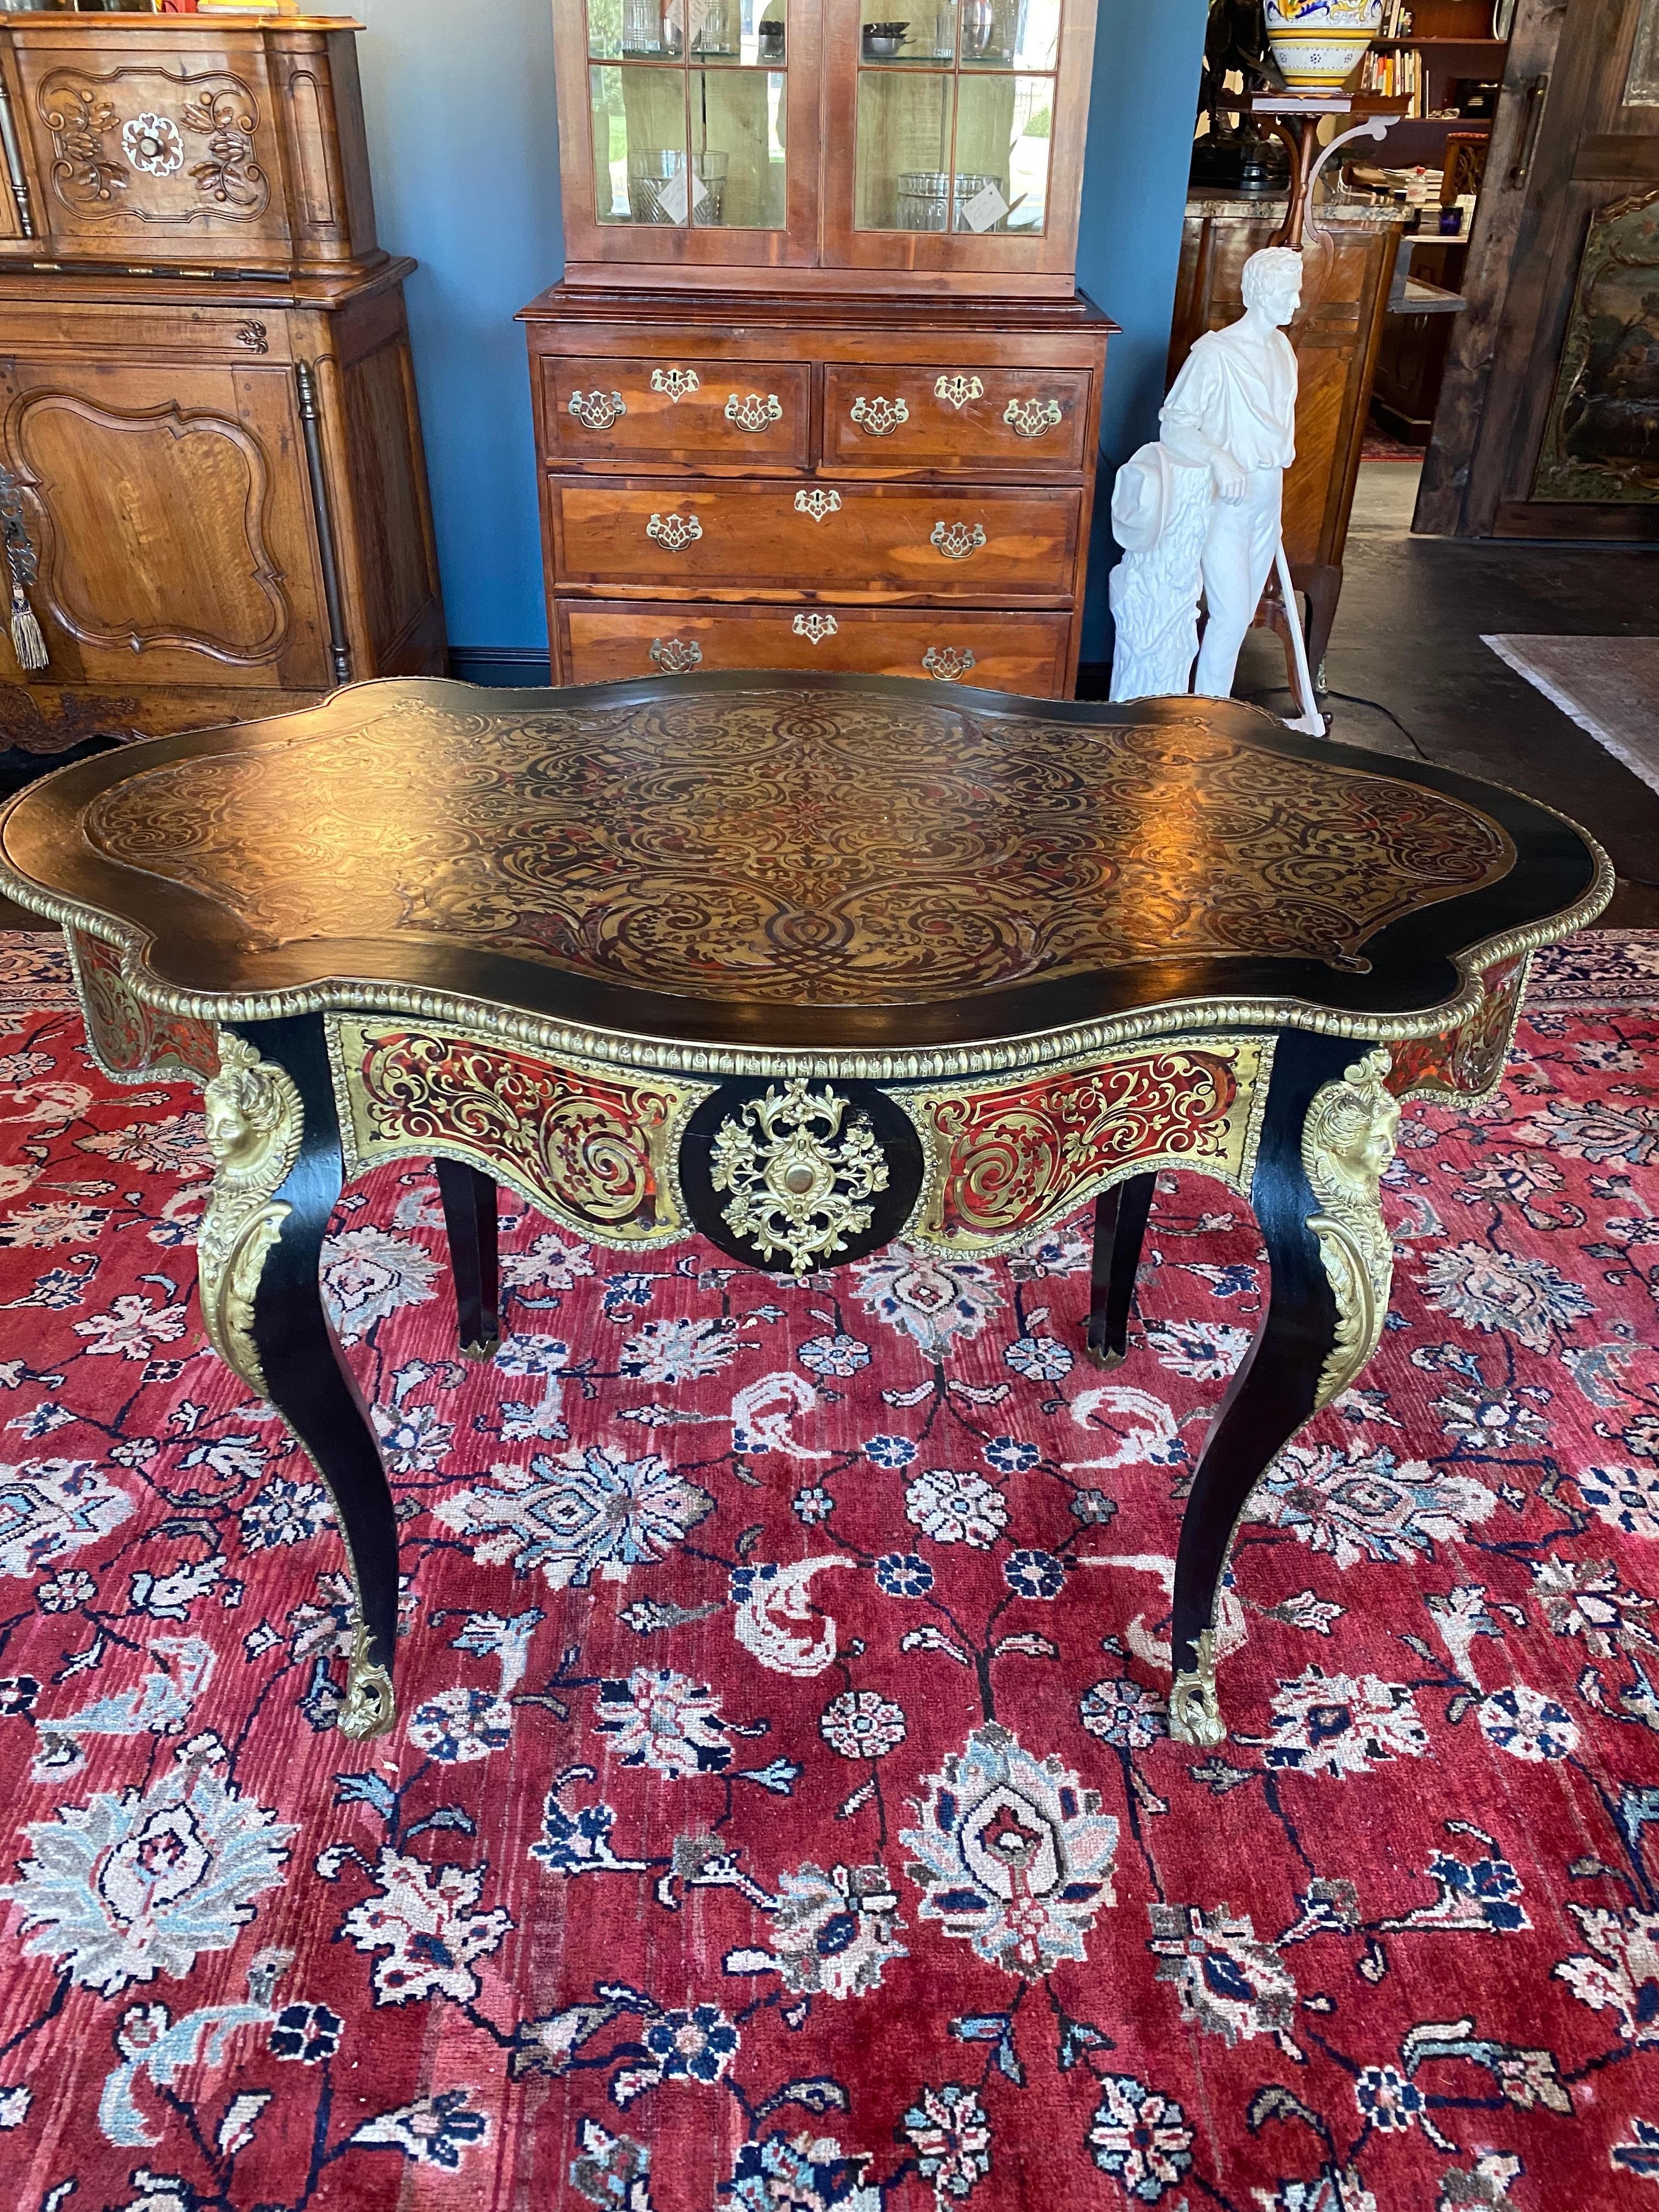 Good condition Ebonized Napoleon III Bedel & Cie Parisian made Boulle style centre table. One centre drawer, four cabriolet legs. The table is heavily decorated with bronze sabots, knee mounts and edge banding throughout. The top is brass and